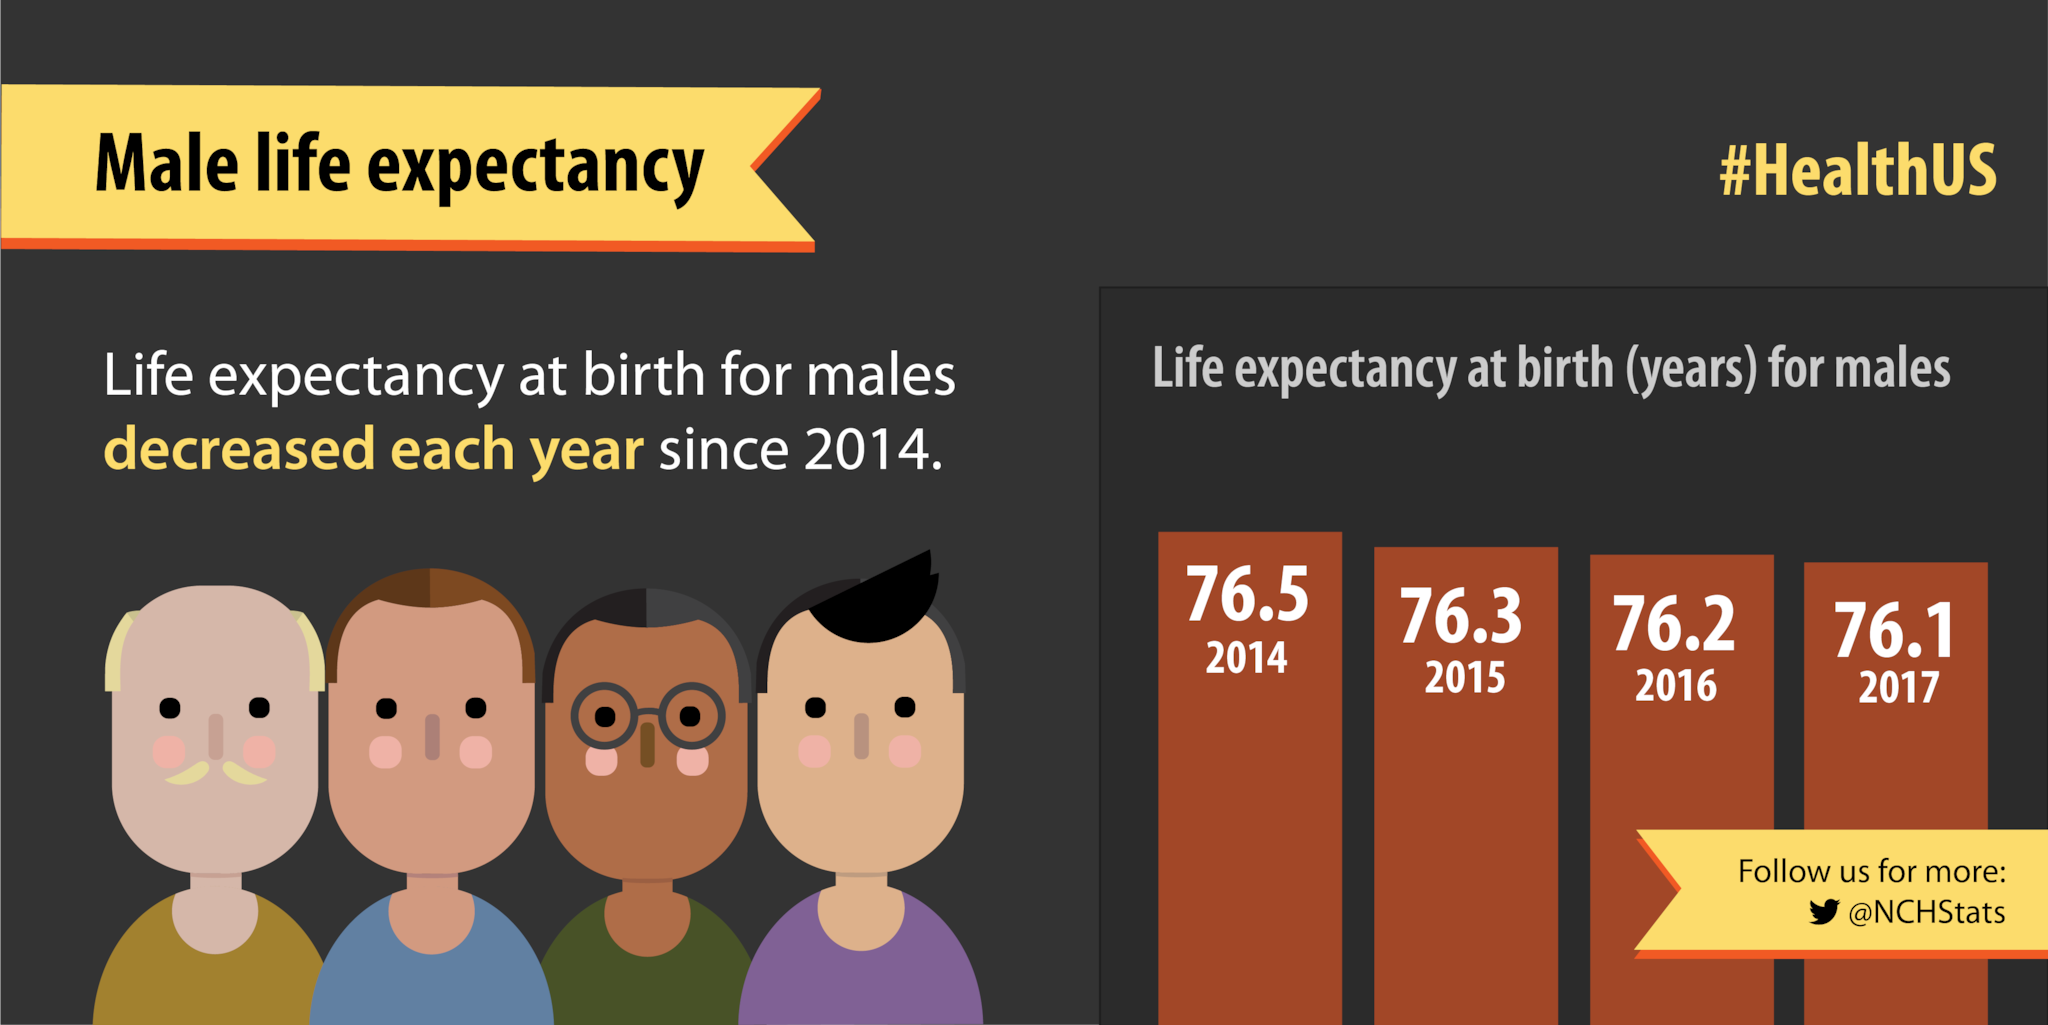 Life expectancy at birth for males decreased each year since 2014.